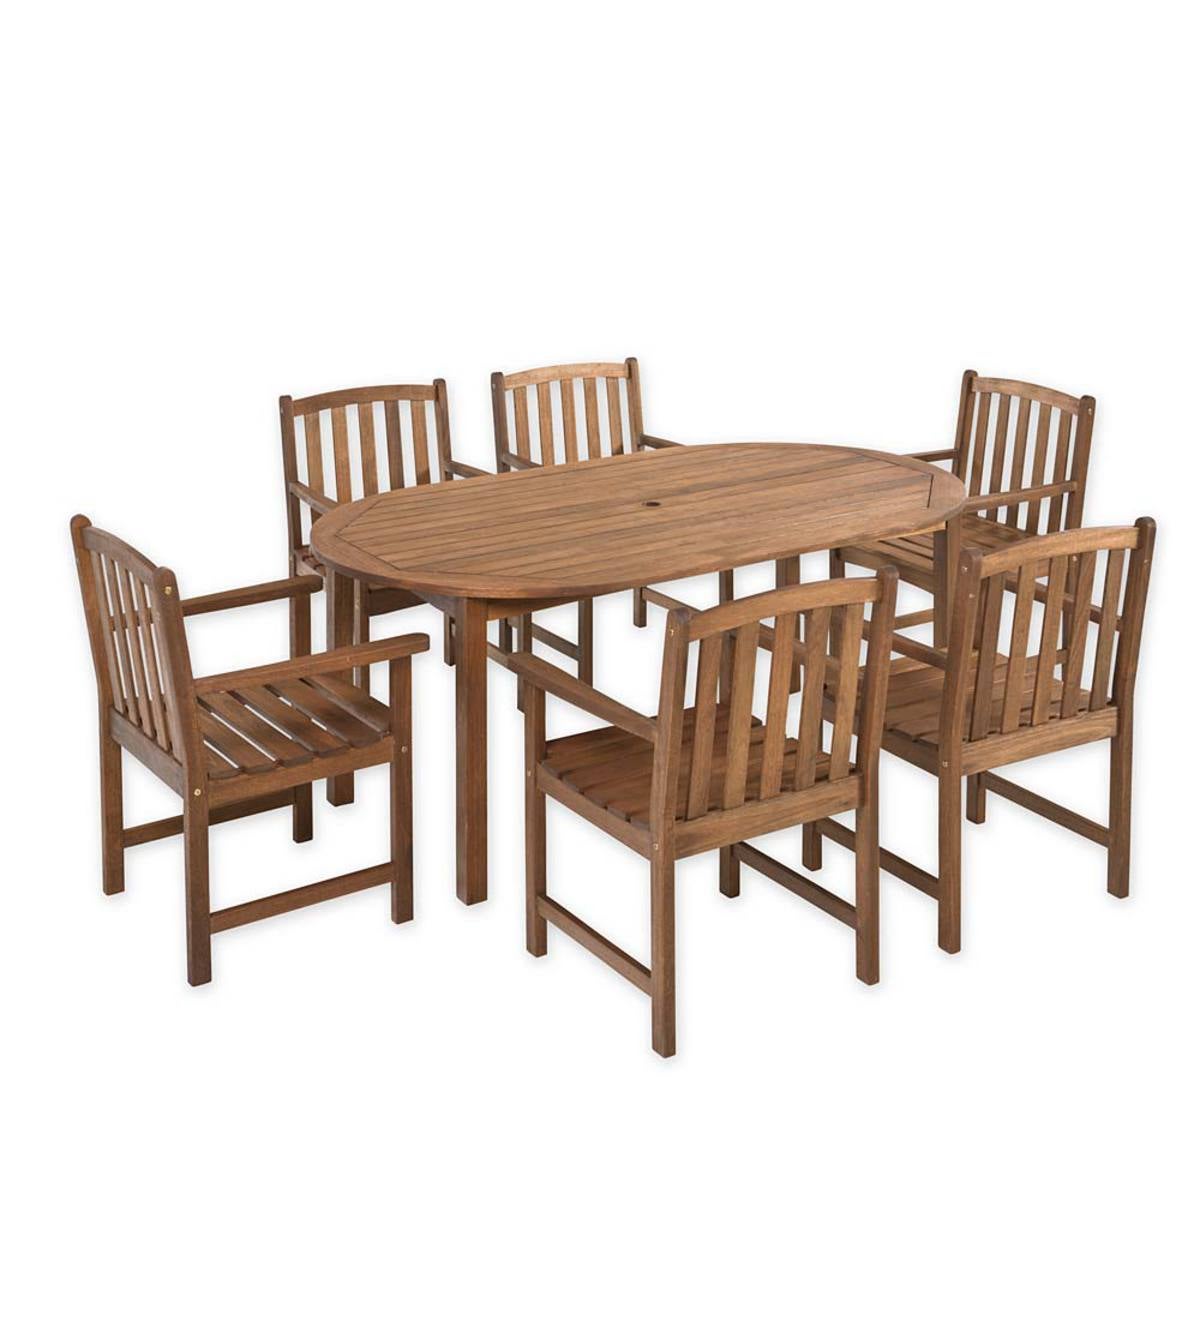 Lancaster Outdoor Furniture Collection, Eucalyptus Wood Oval Table and 6 Chairs